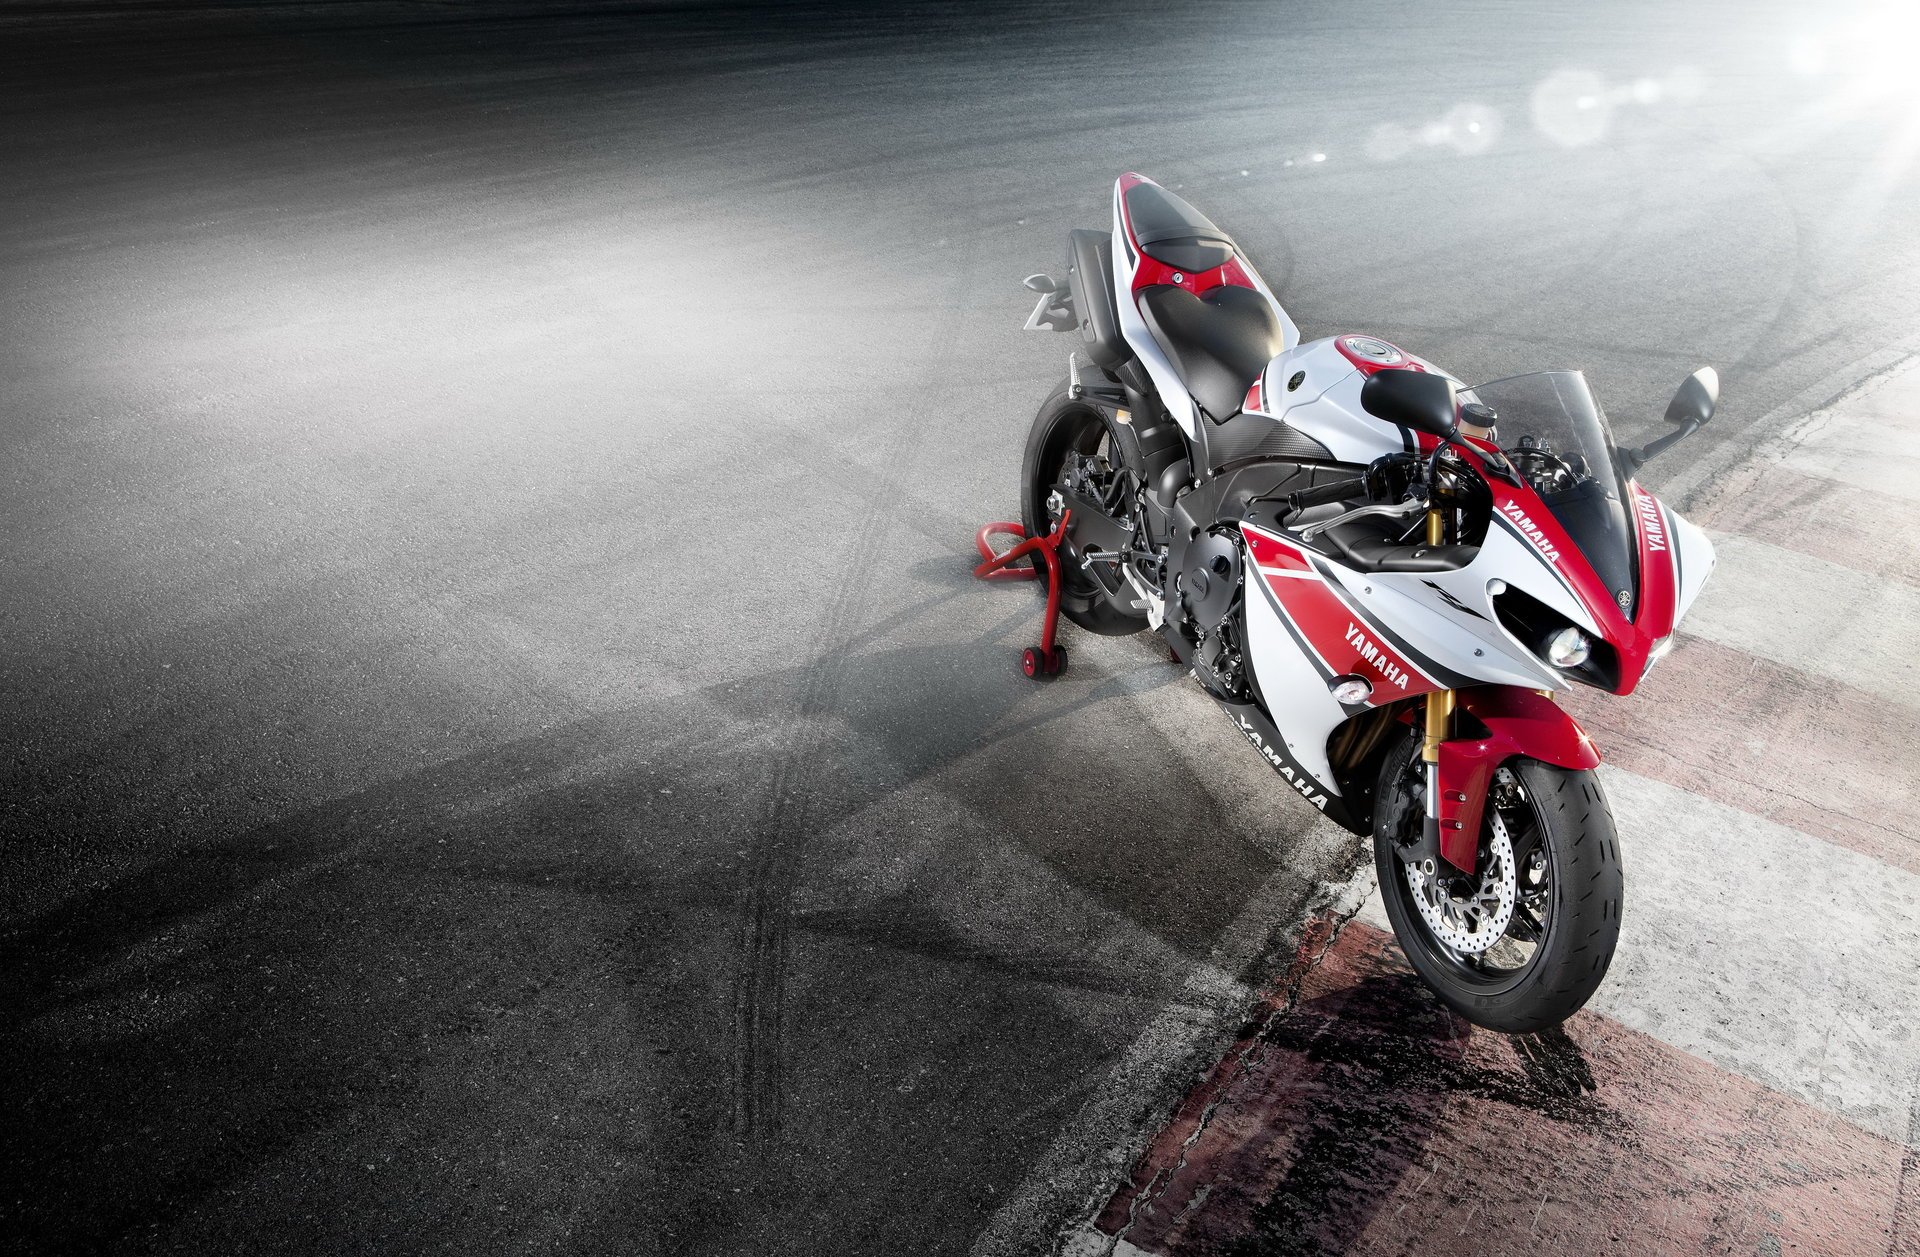 White and red motorcycle on the track